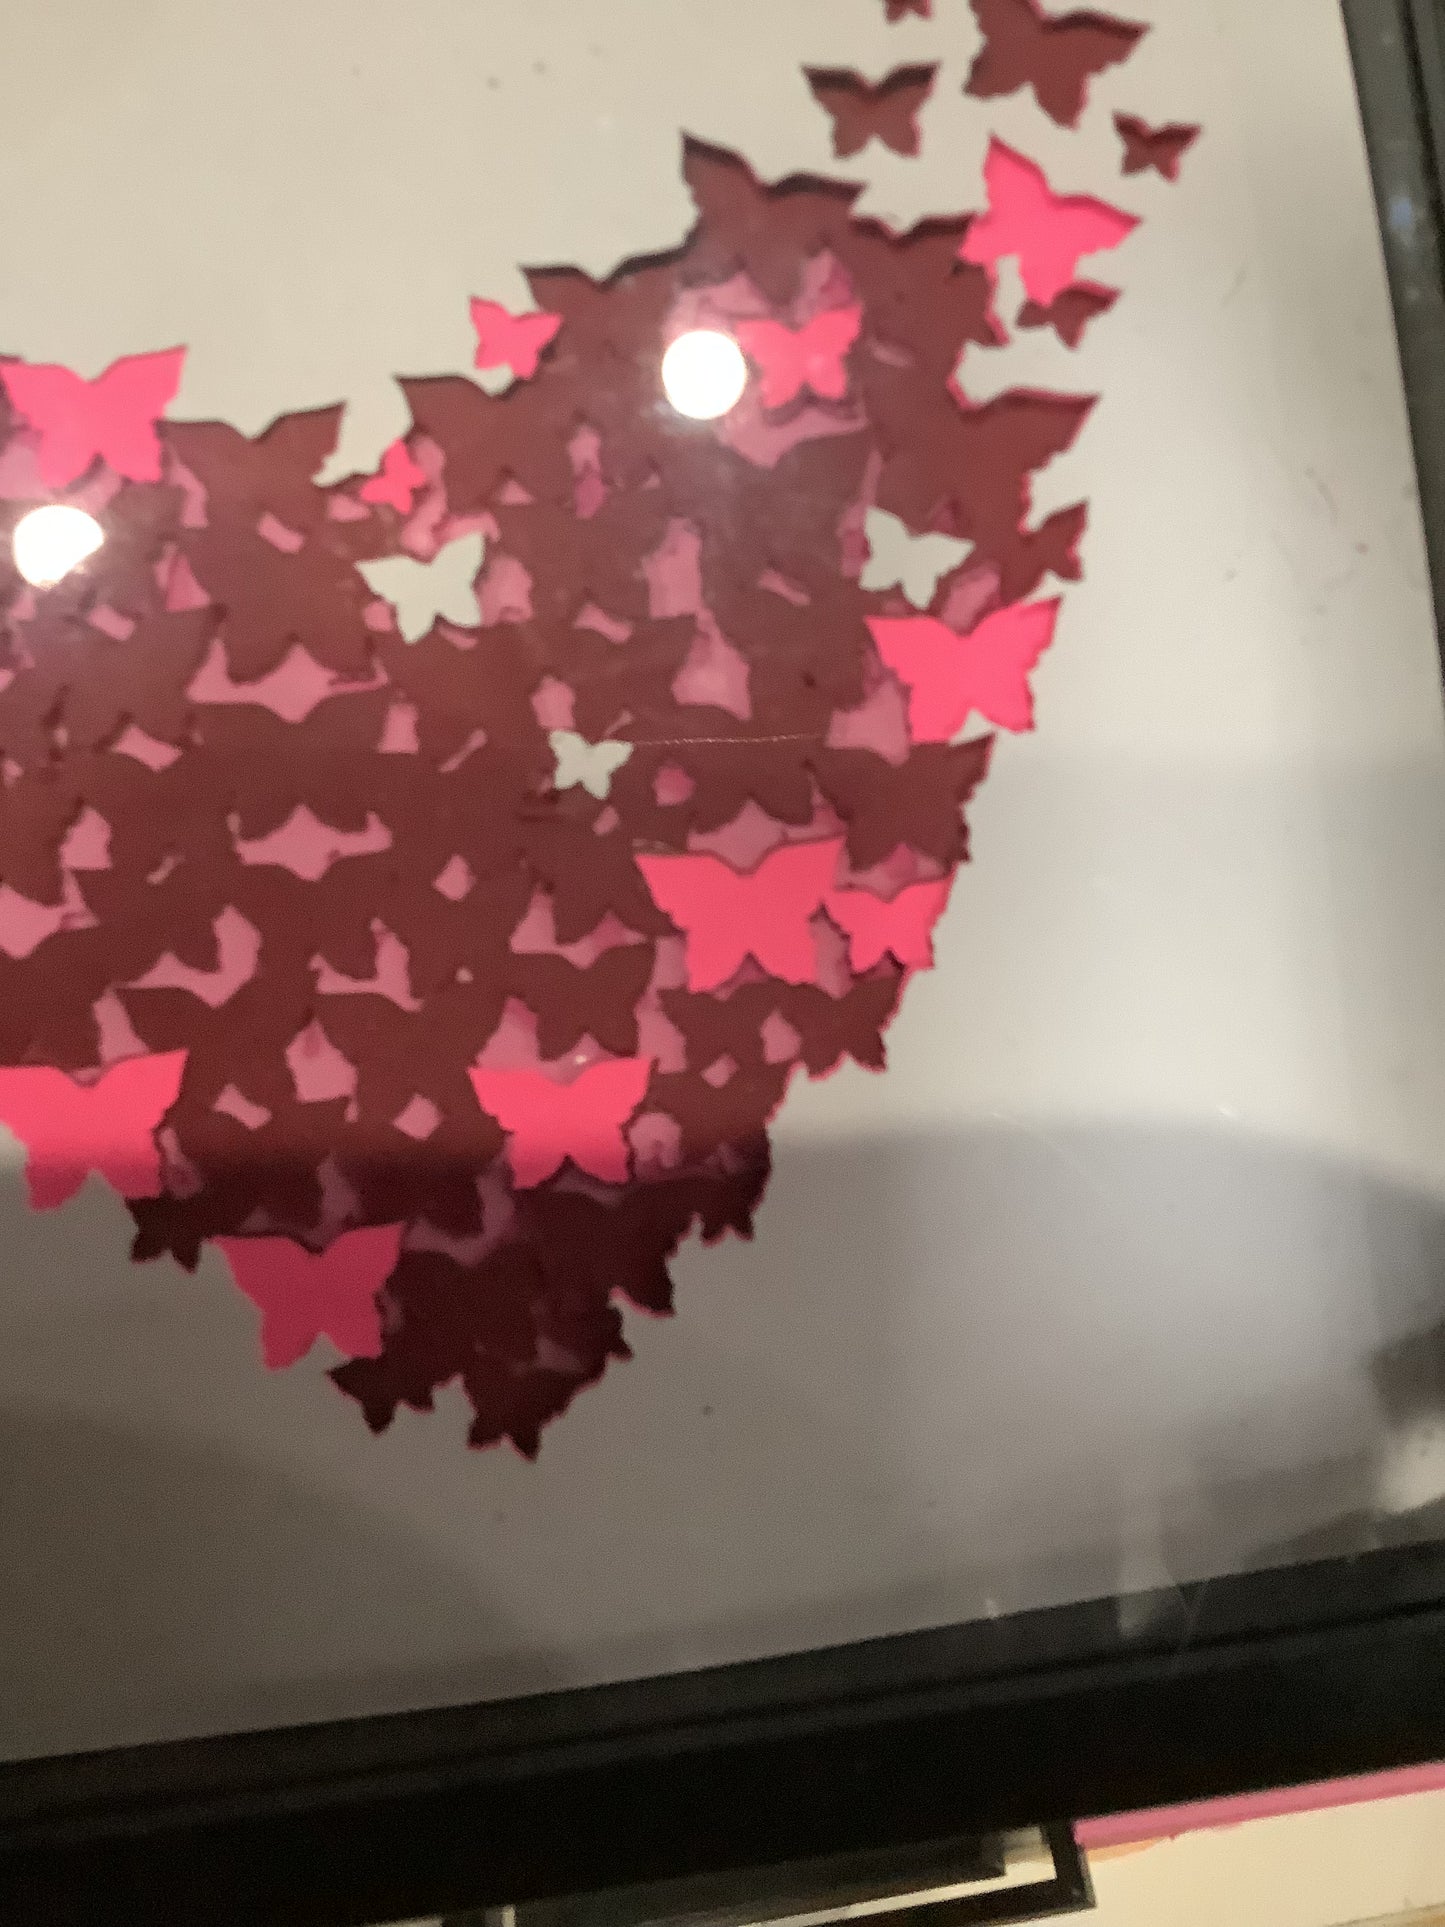 5 1/2 x 5 1/2 black shadow box with paper cut butterflies, turning into a heart